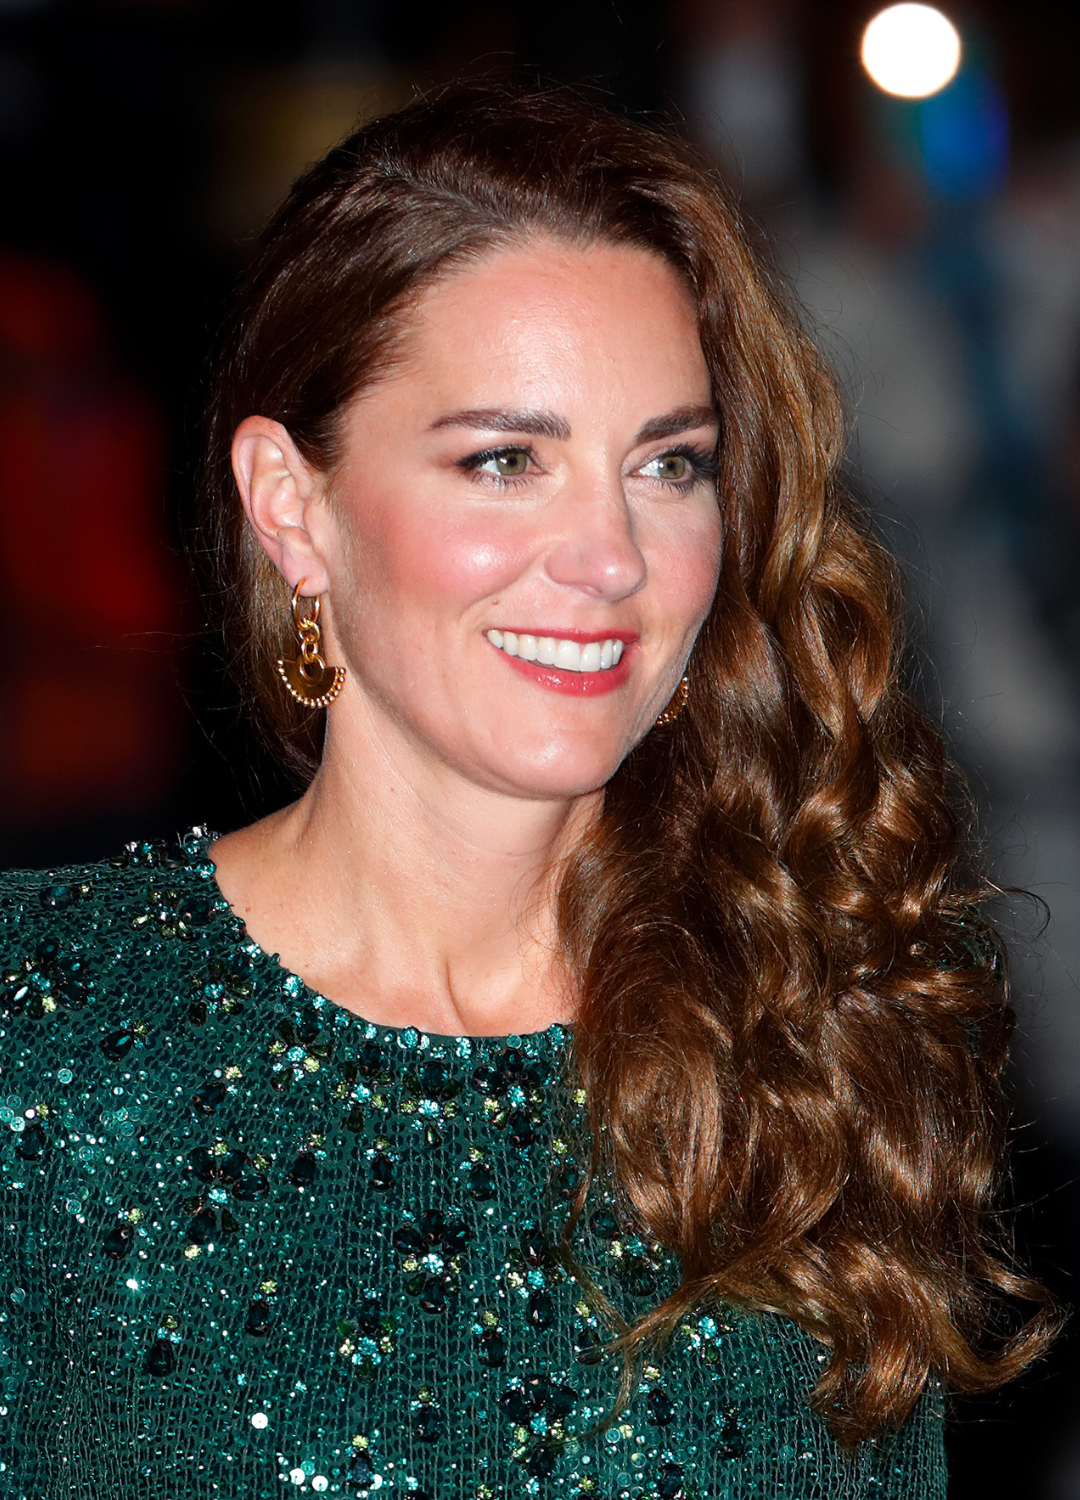 Catherine, Duchess of Cambridge attends the Royal Variety Performance at the Royal Albert Hall on November 18, 2021 in London, England